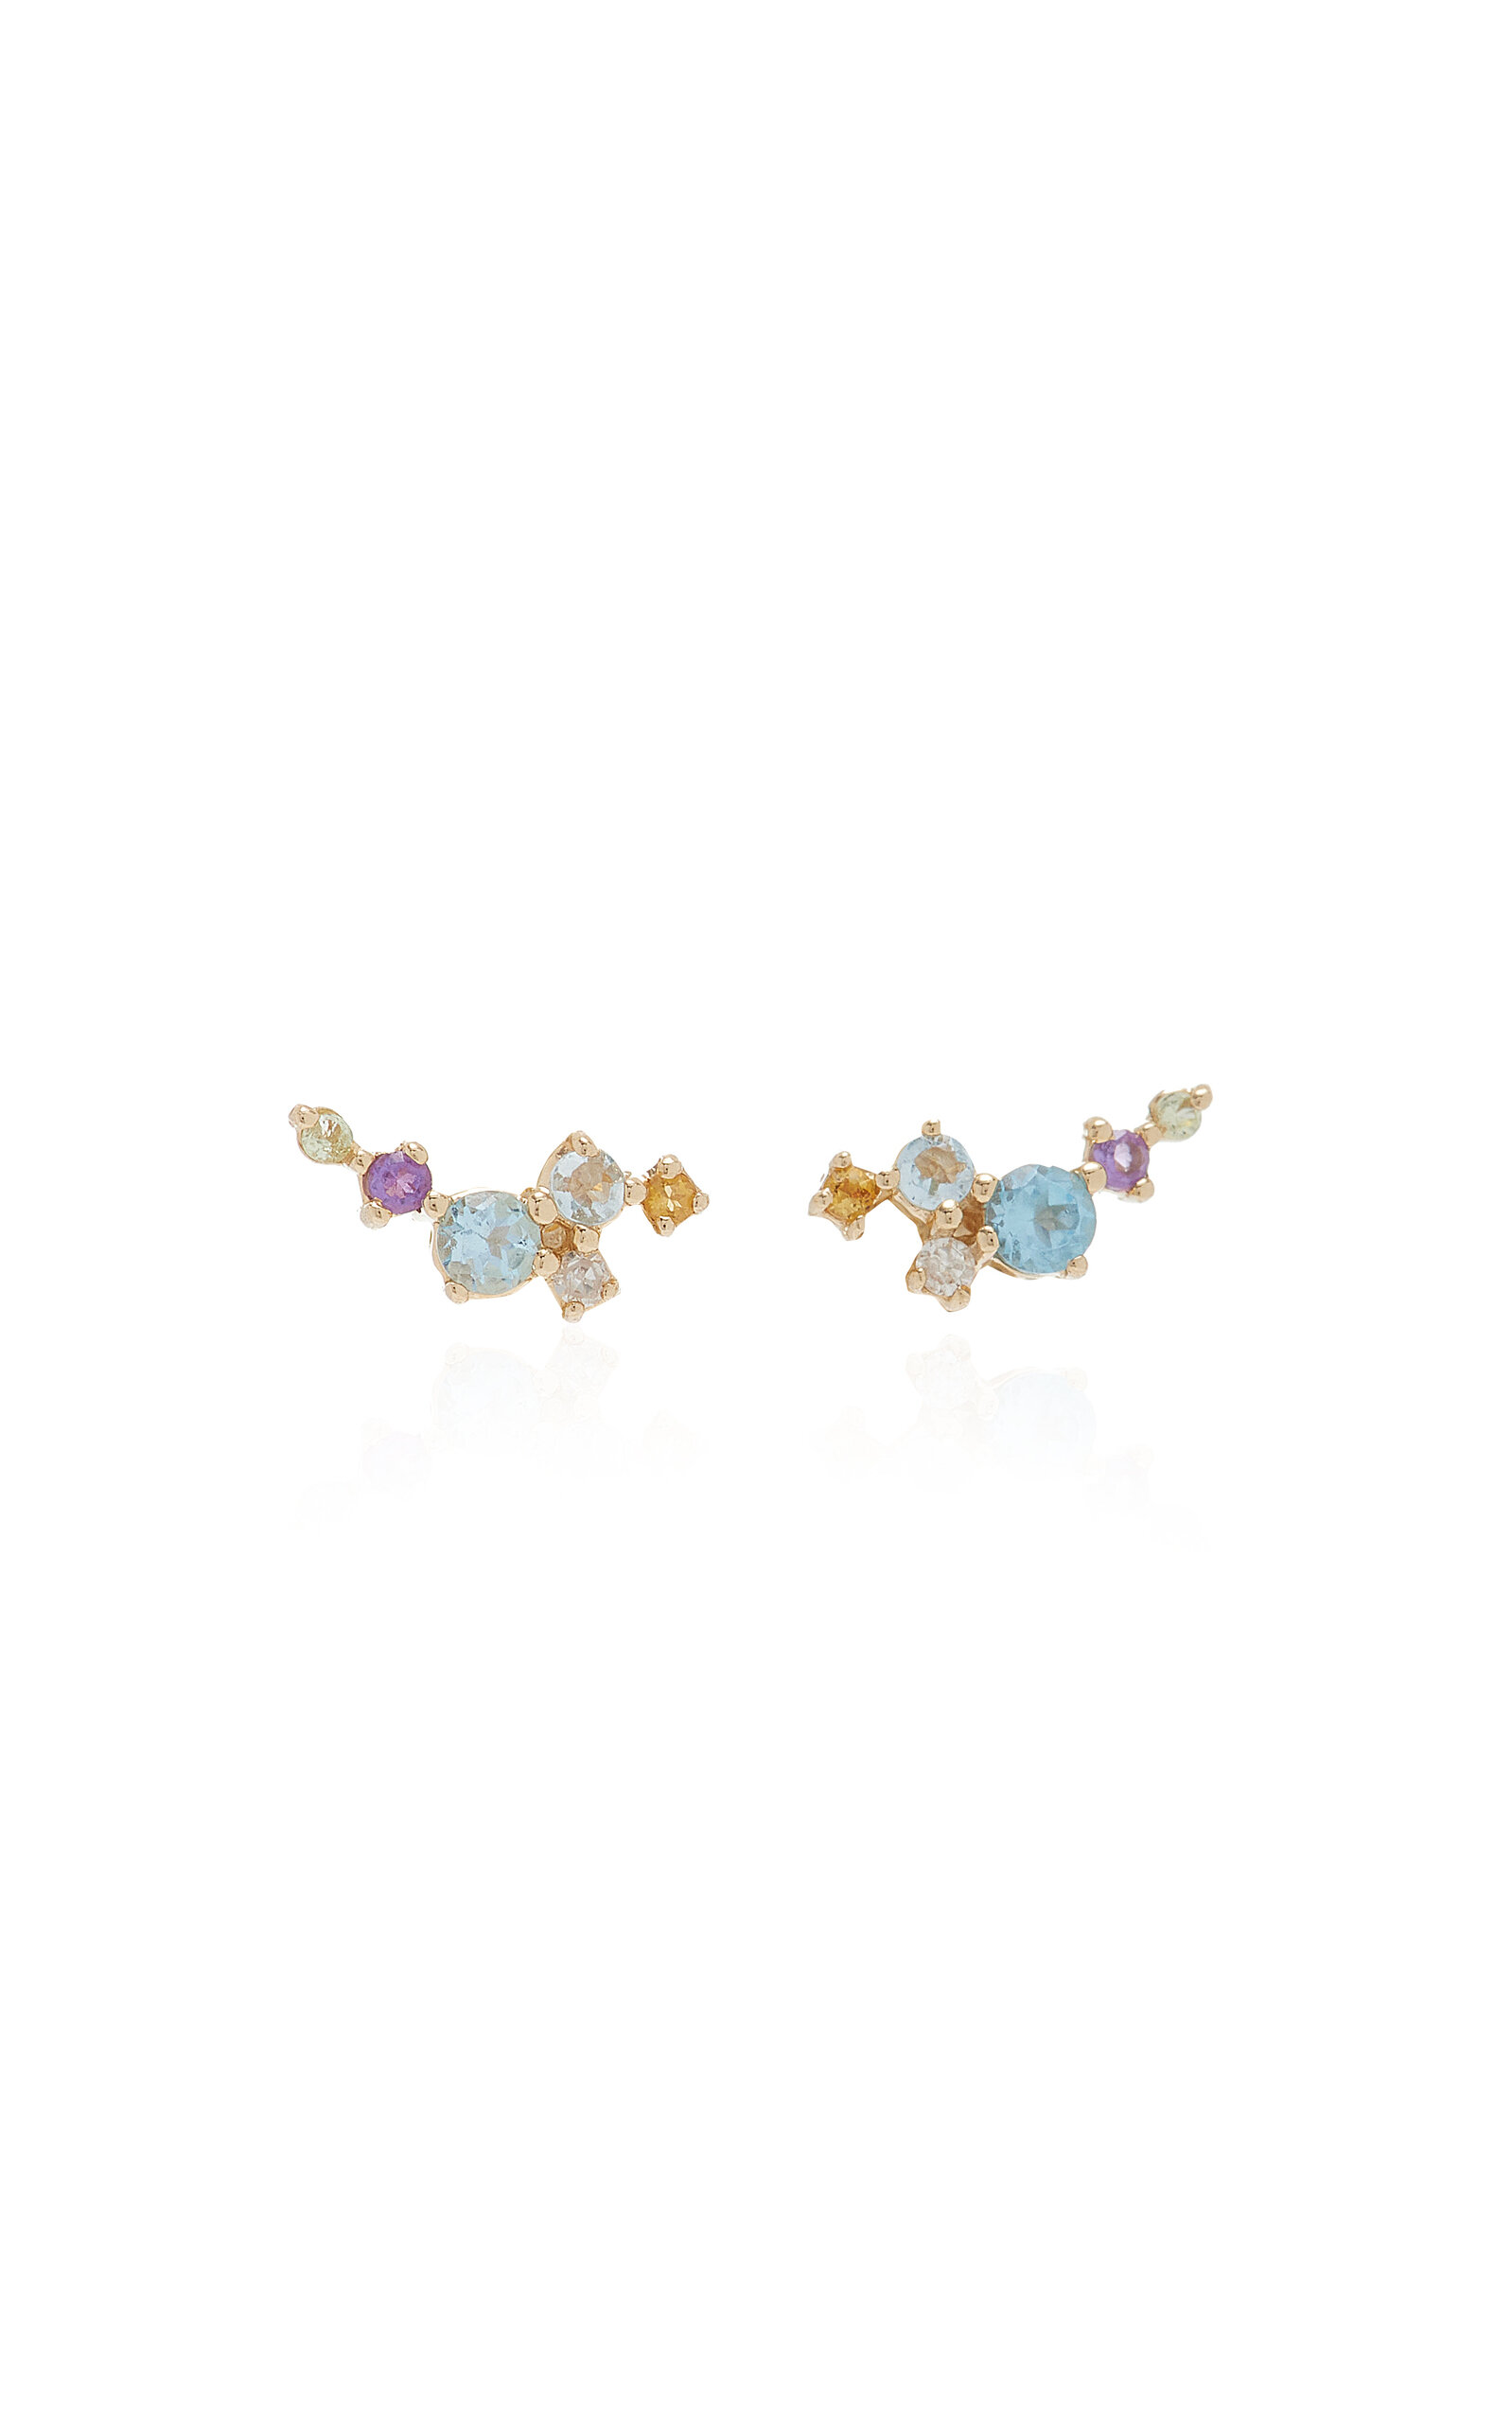 Adina Reyter 14k Yellow Gold Multi-stone Scattered Bubbles Earrings